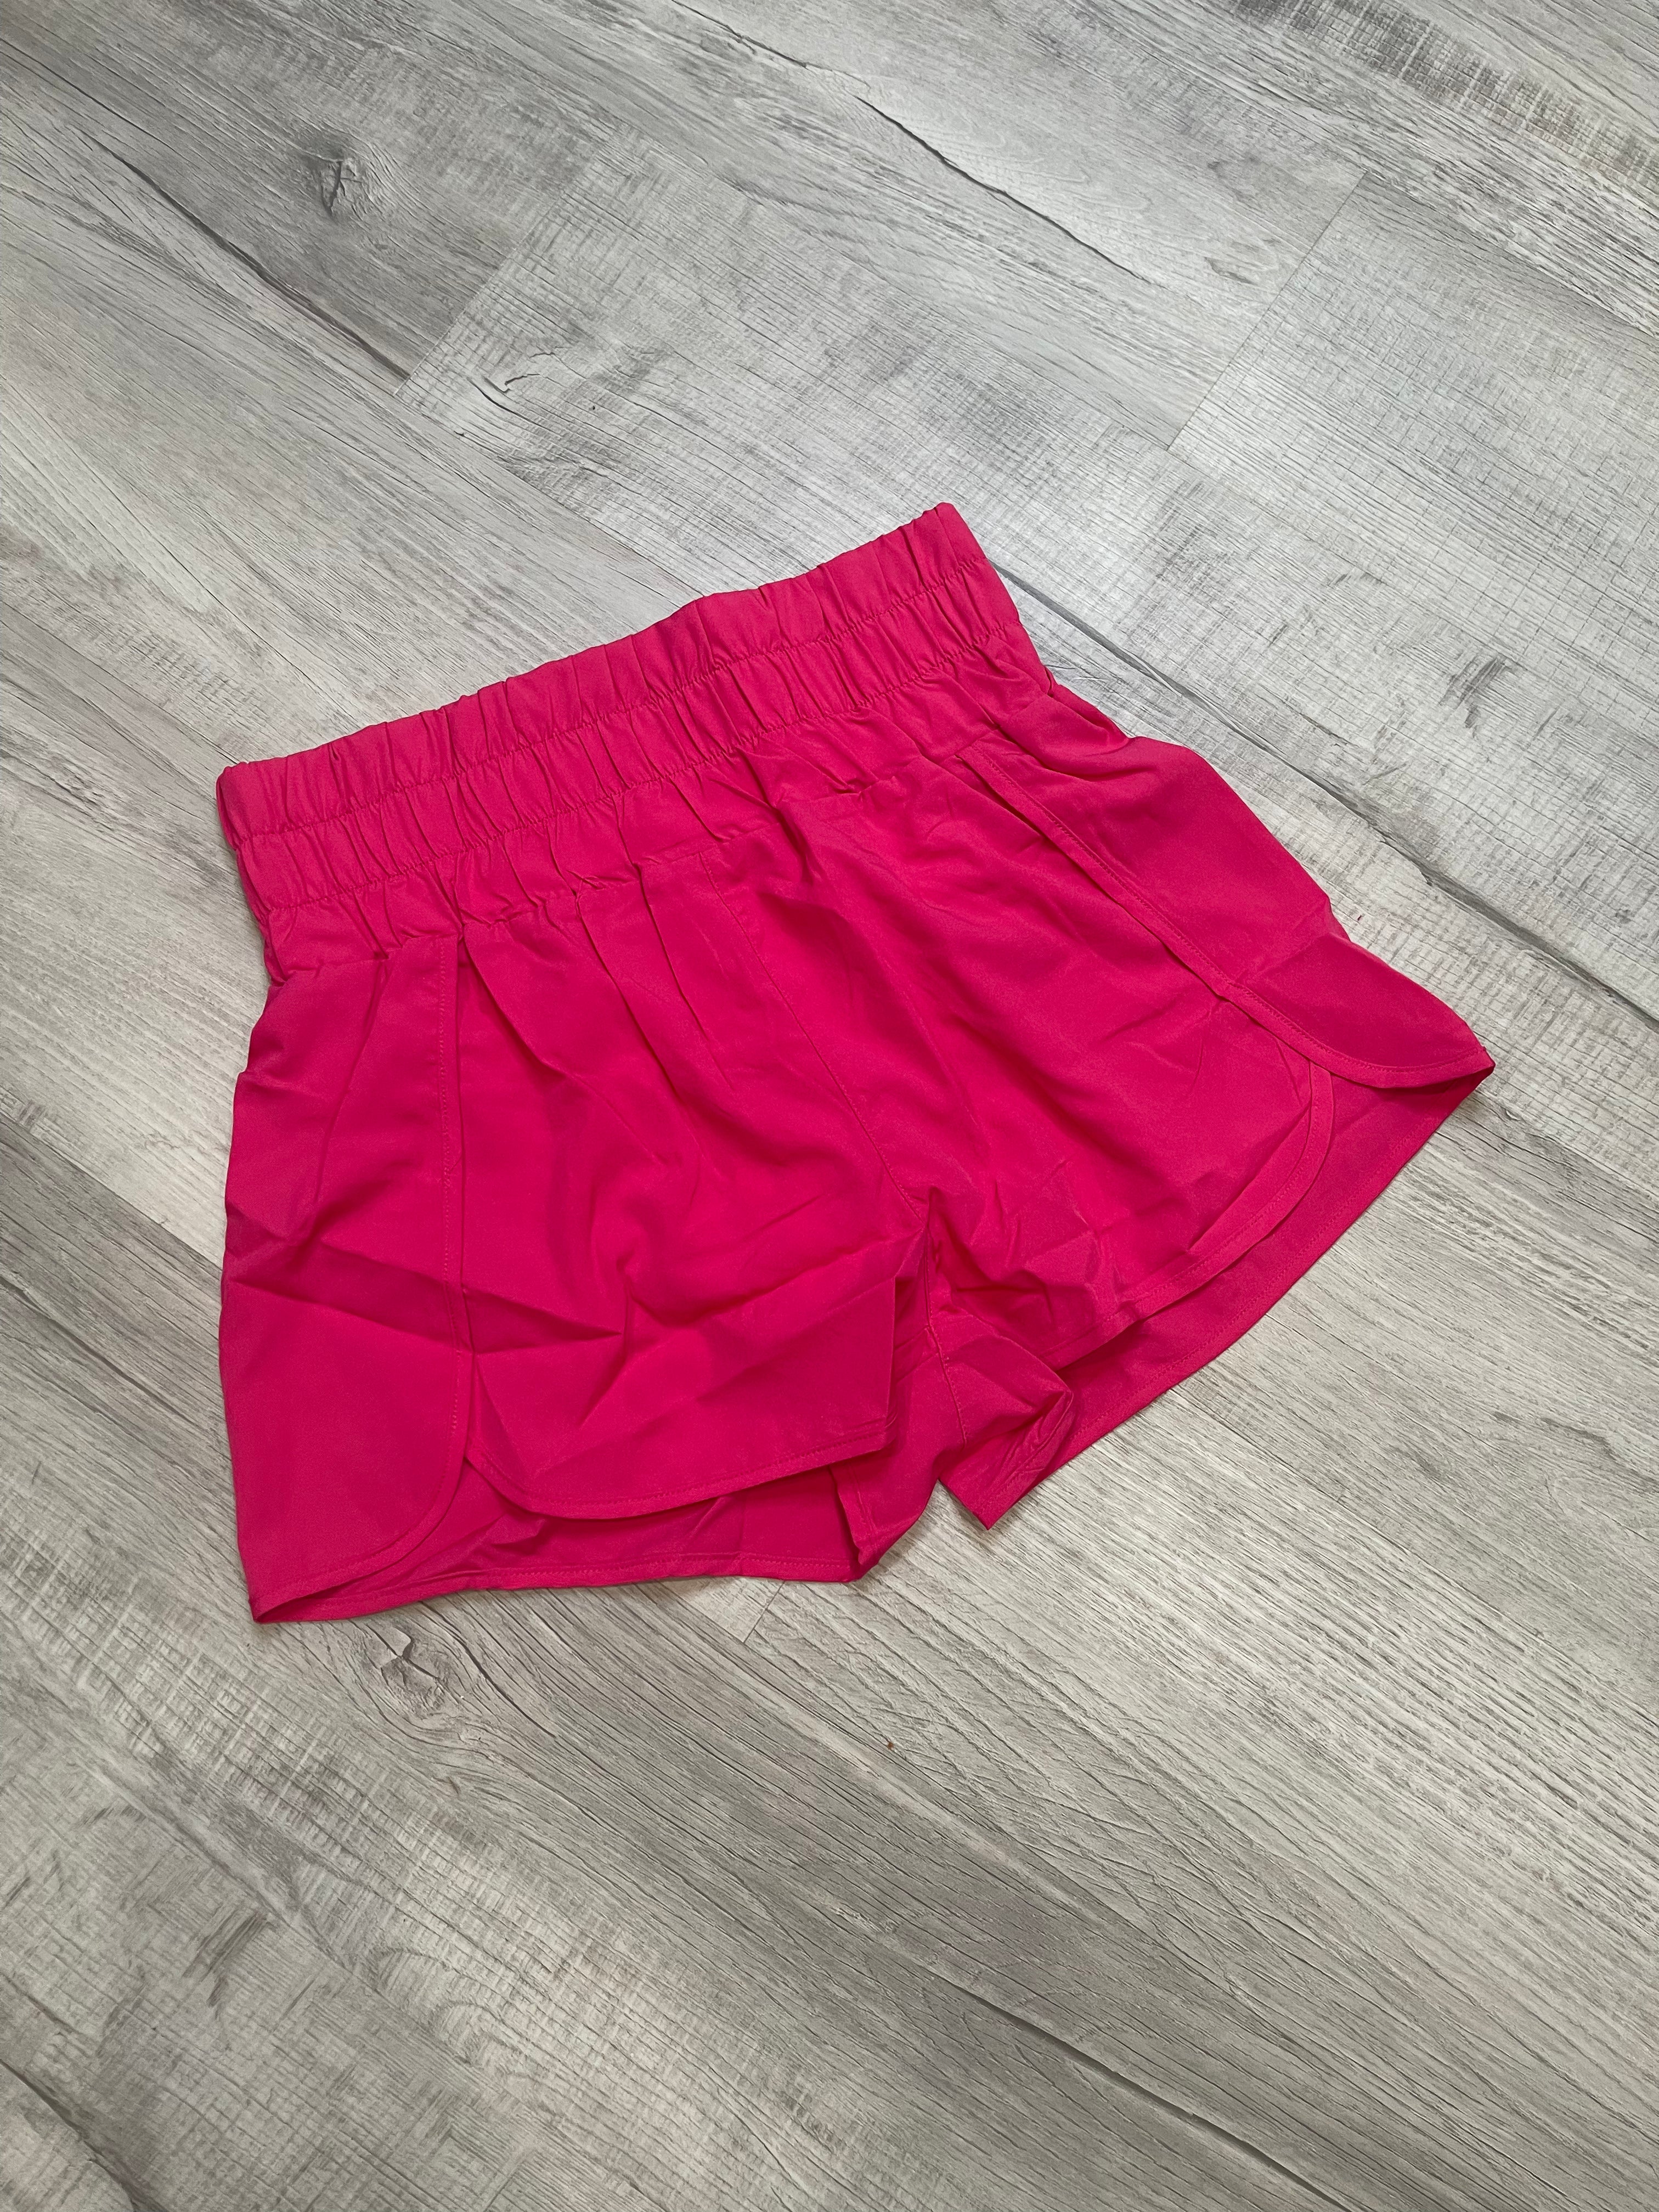 Size Small Hot Pink High Waist Smocked Top Running Shorts